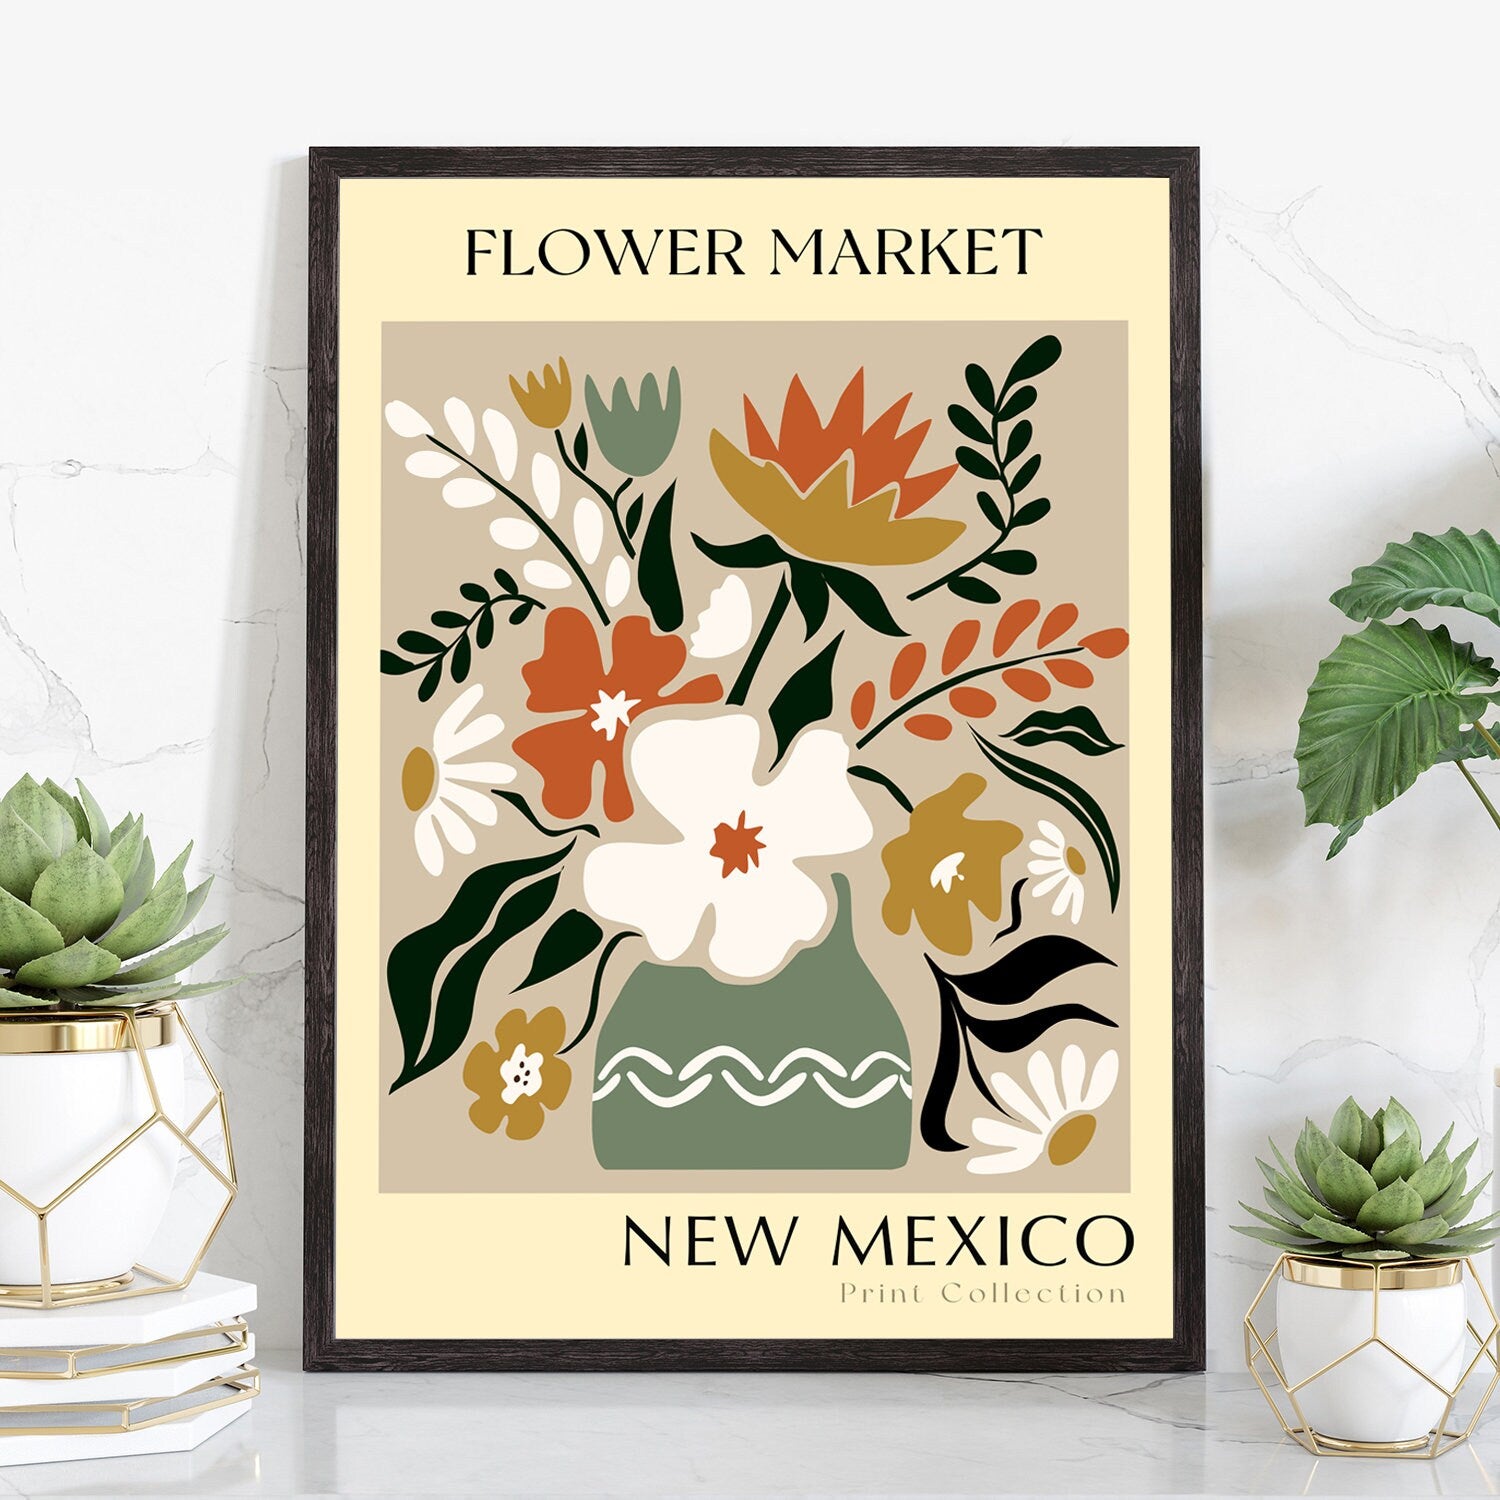 New Mexico State flower print, States poster, New Mexico flower market poster, Botanical poster, Nature poster artwork, Boho floral wall art